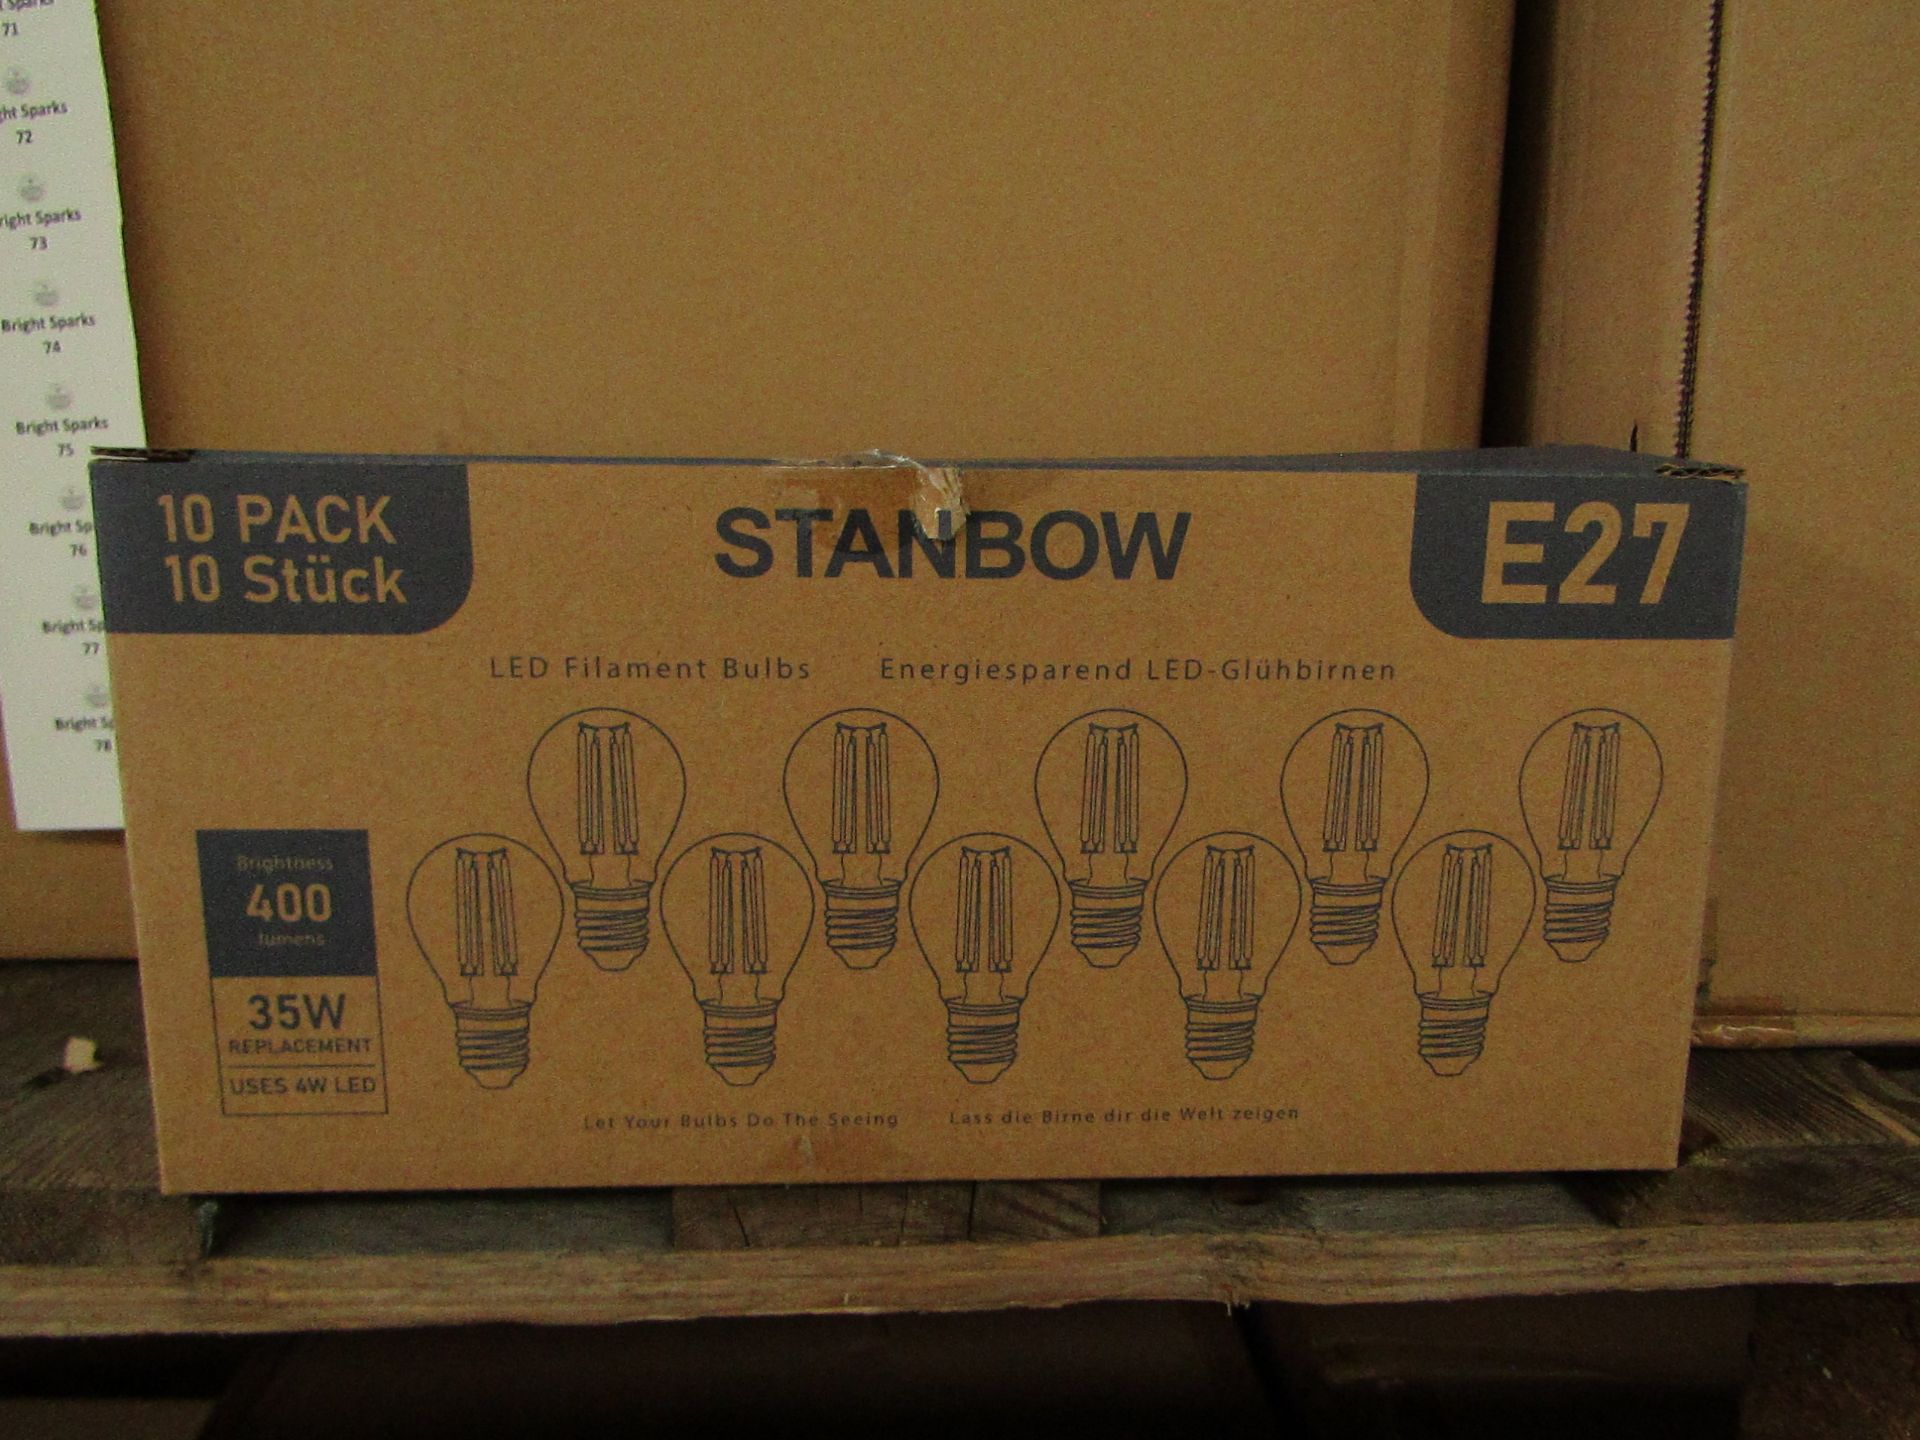 Pack of 10 Stanbow E27 4w LED filament light bulbs, new and boxed